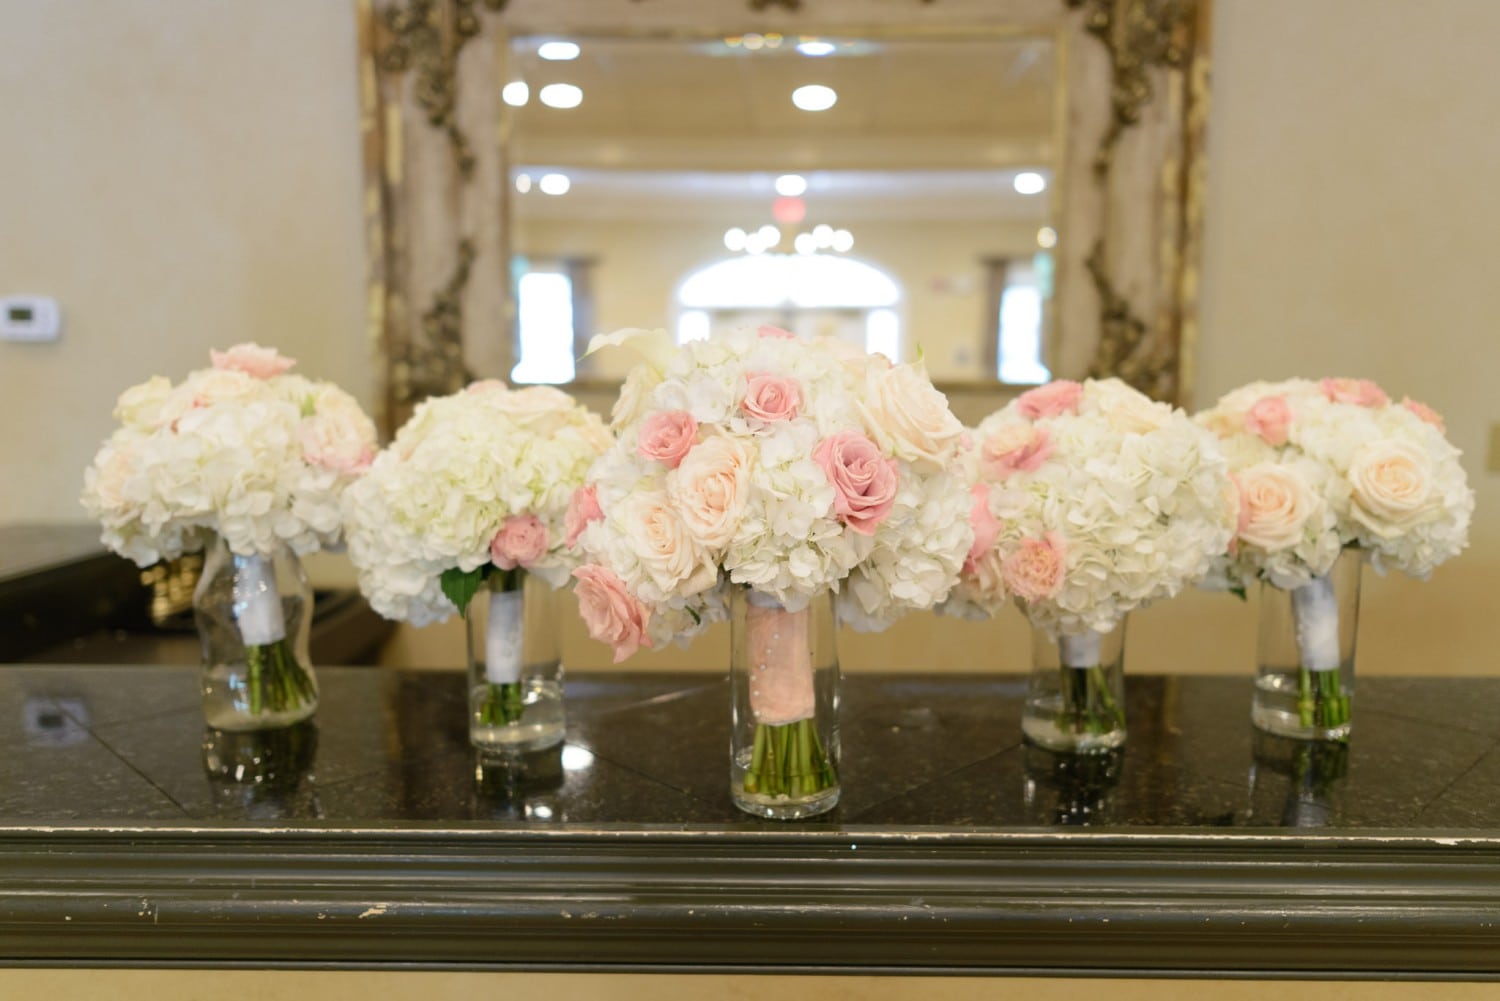 Bridal party flowers before ceremony - Pawleys Plantation